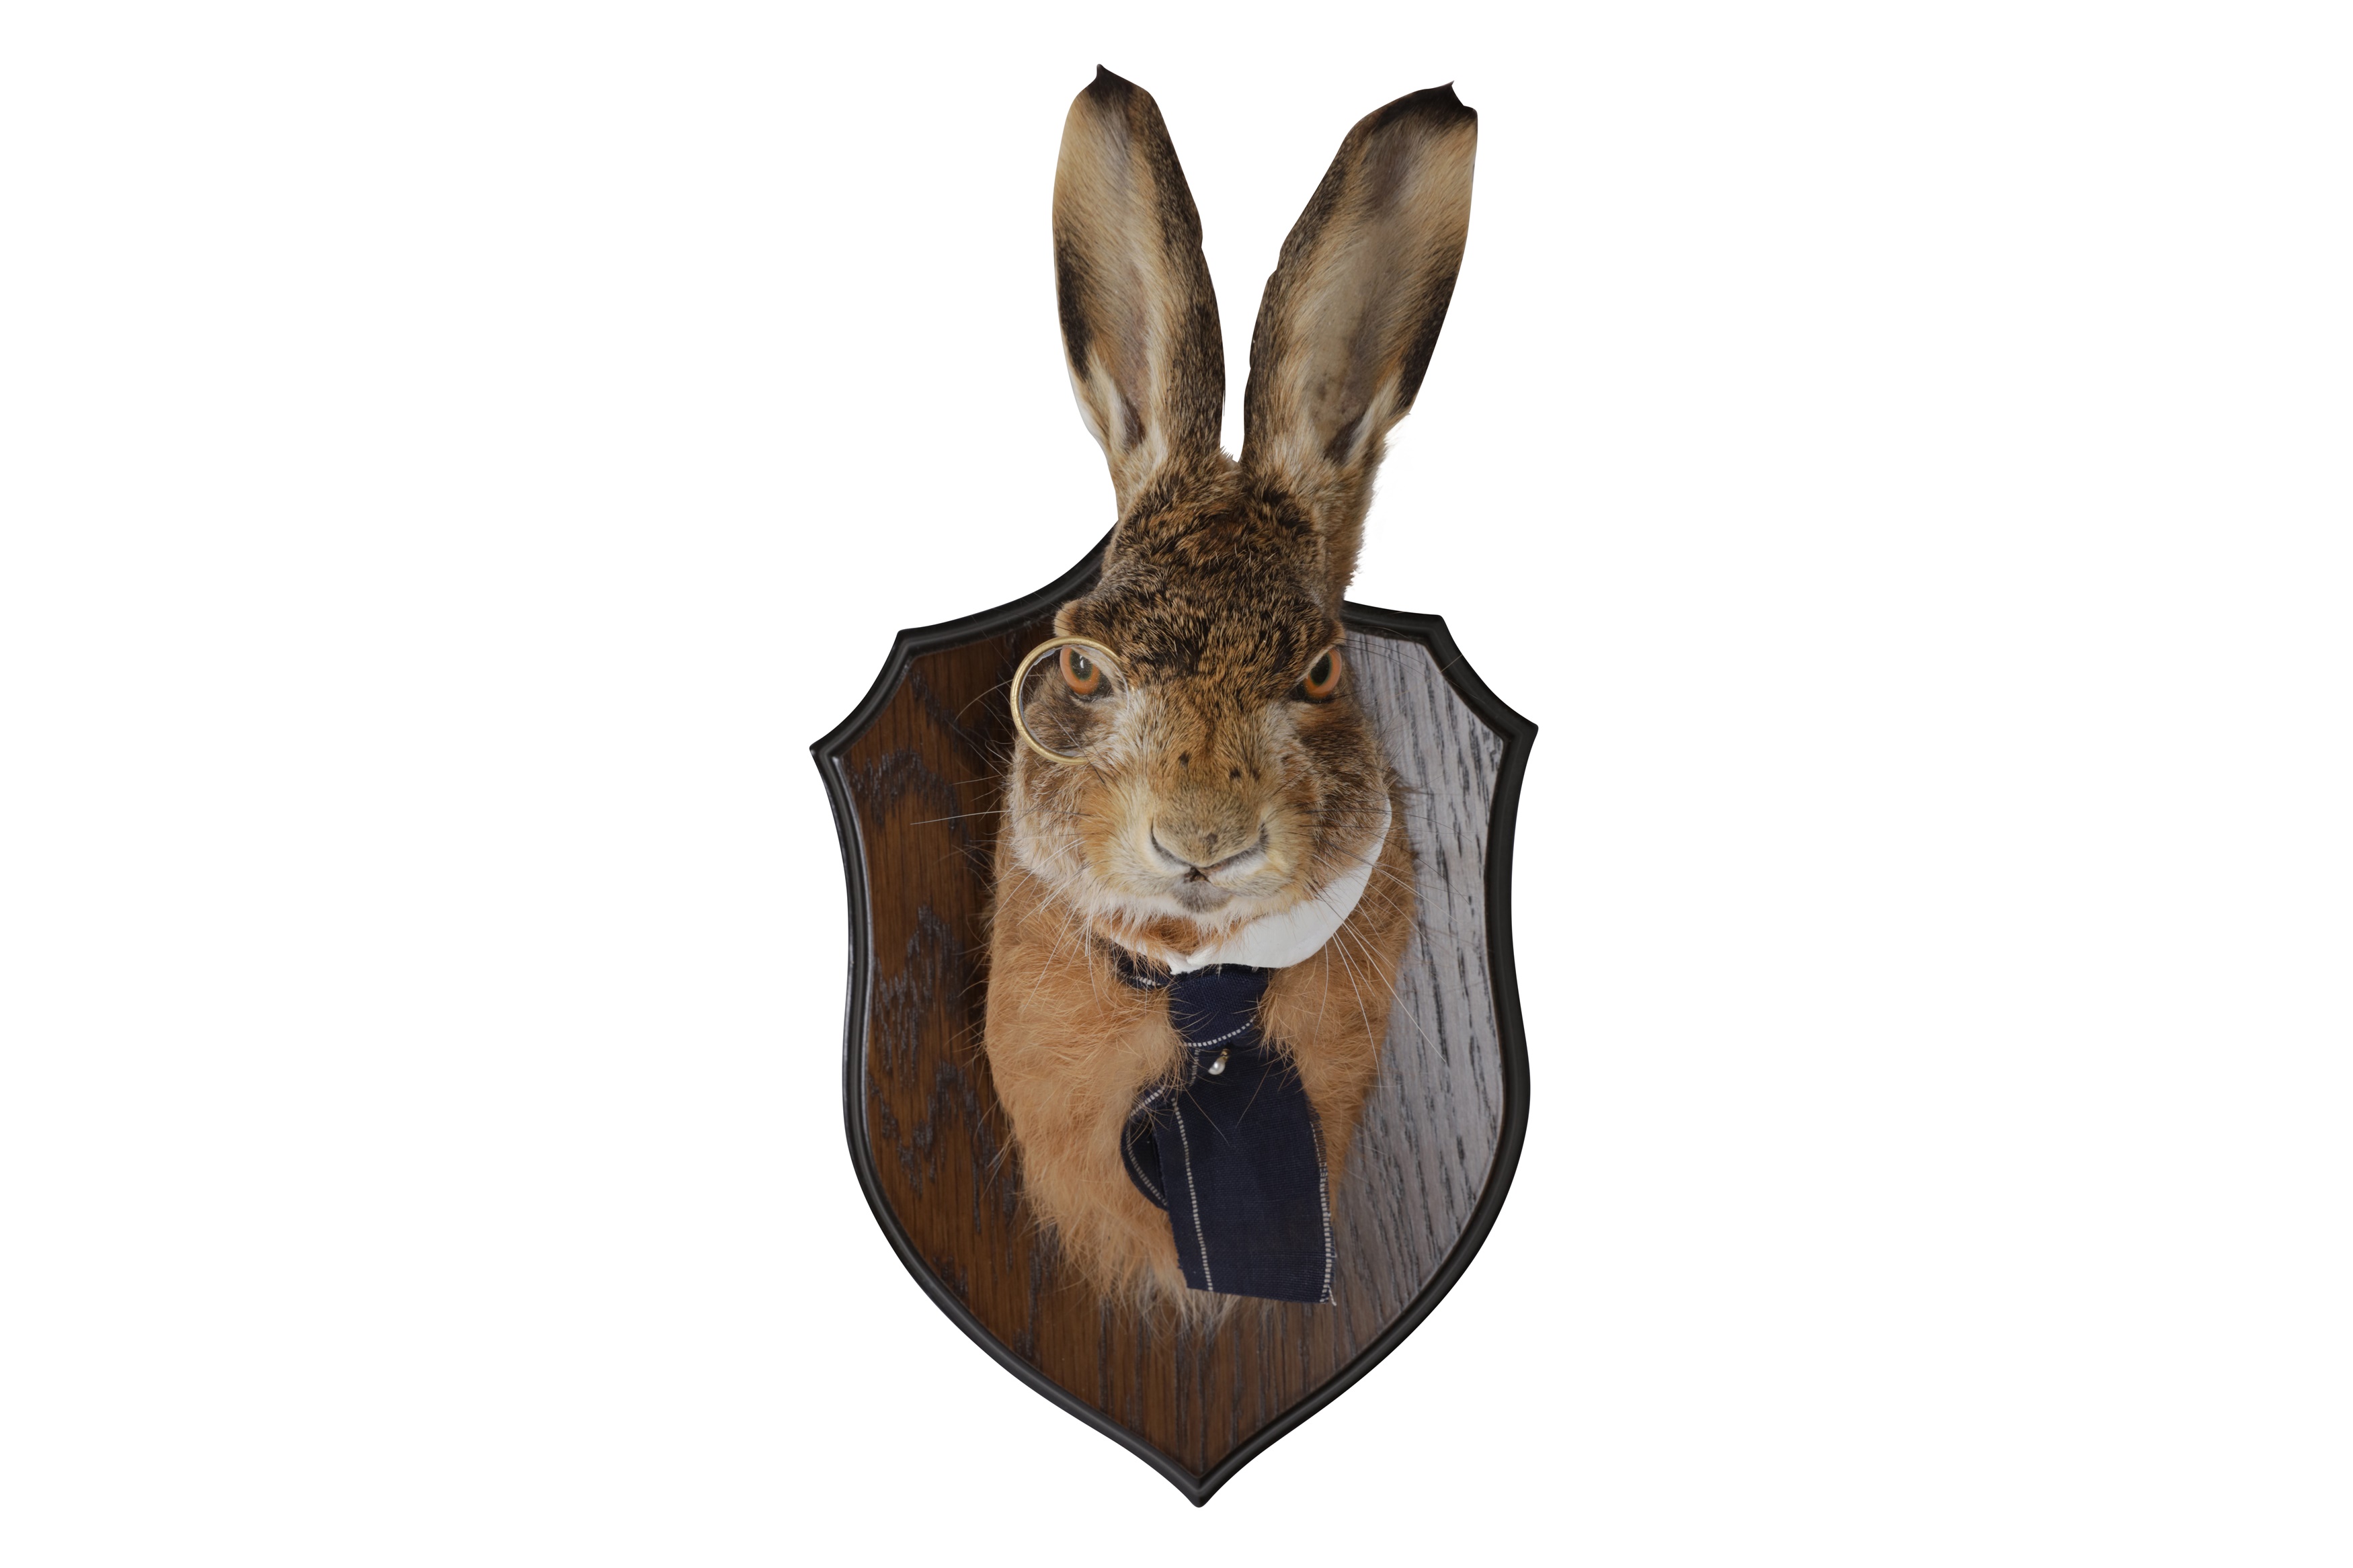 AN ANTHROPOMORPHIC TAXIDERMY TROPHY OF A GENTLEMAN HARE - Image 2 of 3